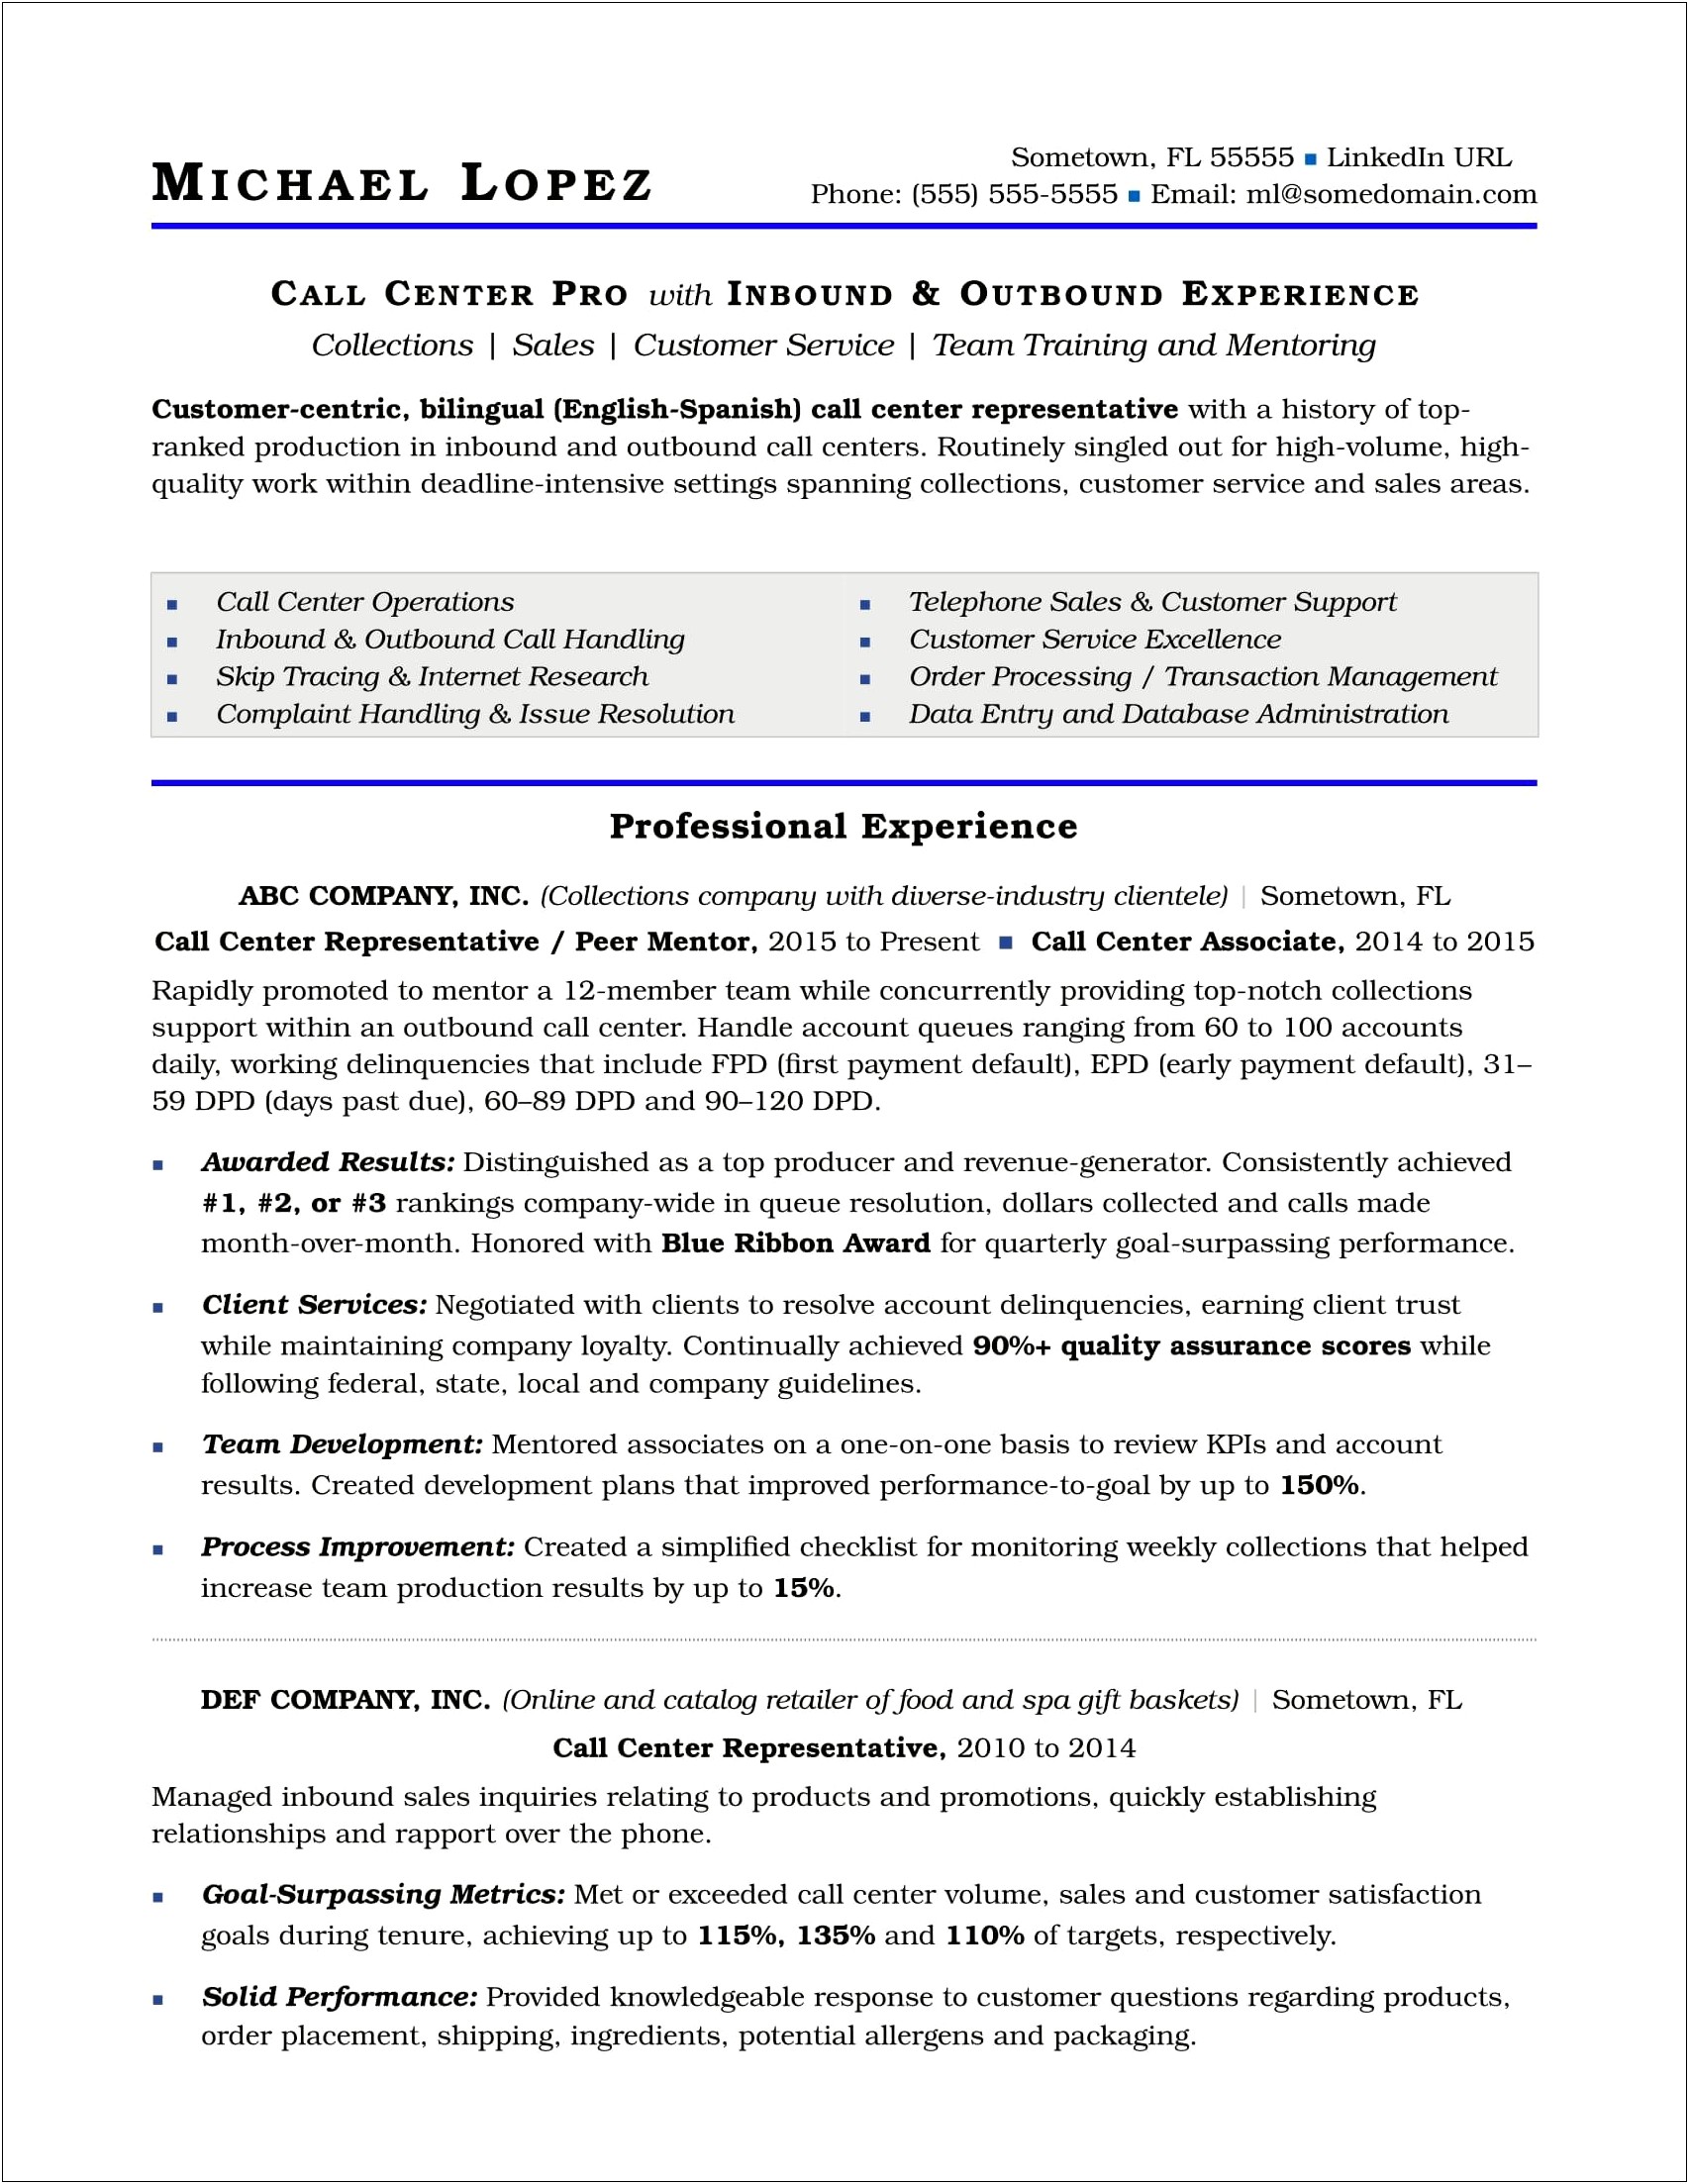 Separating Work Experience From Skills In A Resume